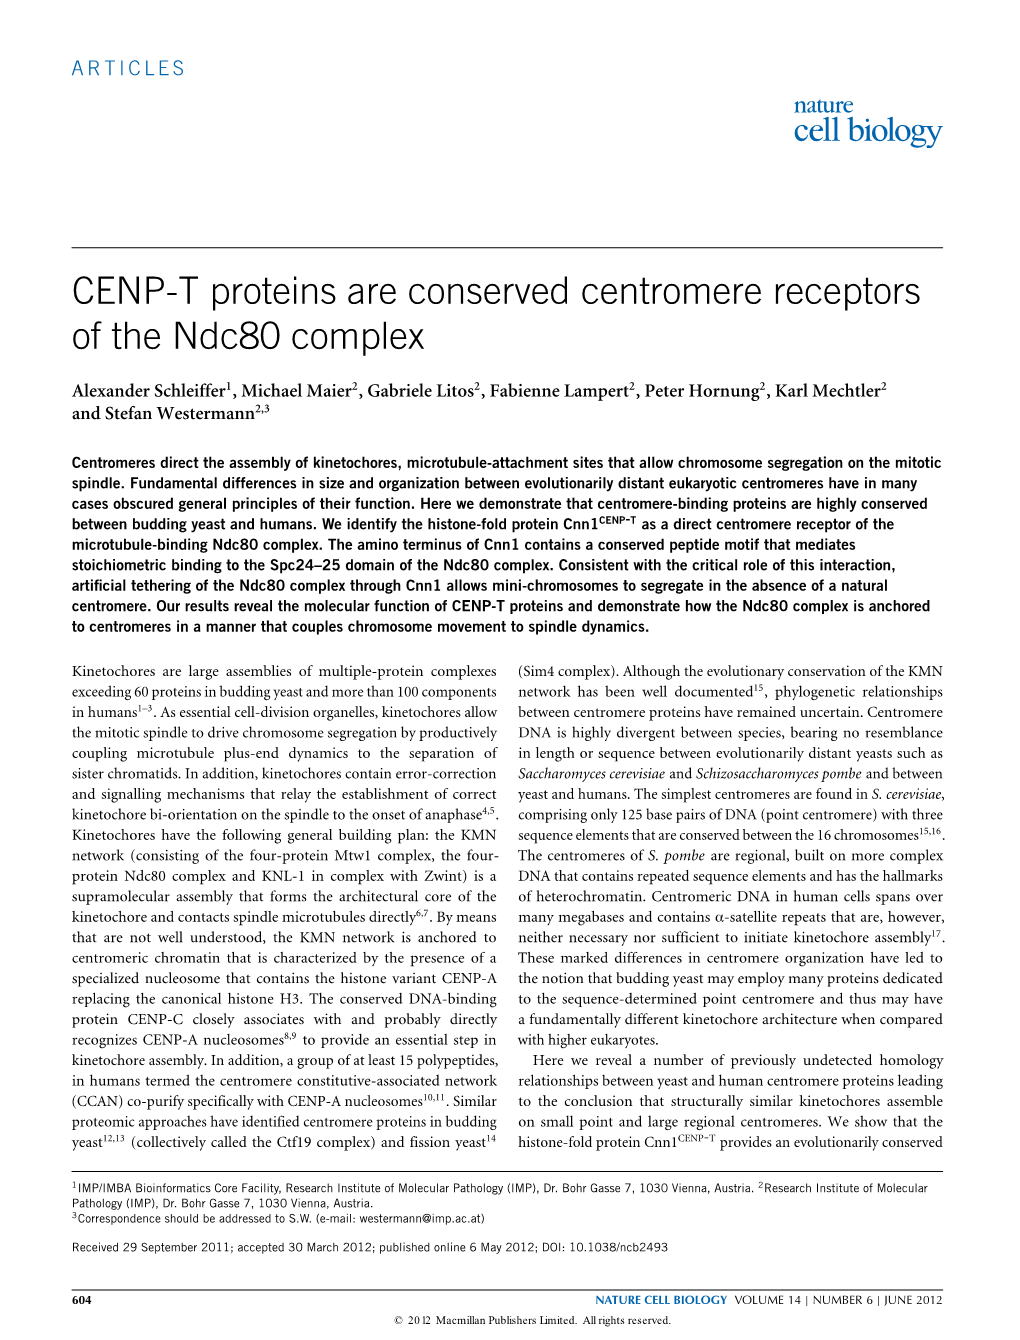 CENP-T Proteins Are Conserved Centromere Receptors of the Ndc80 Complex